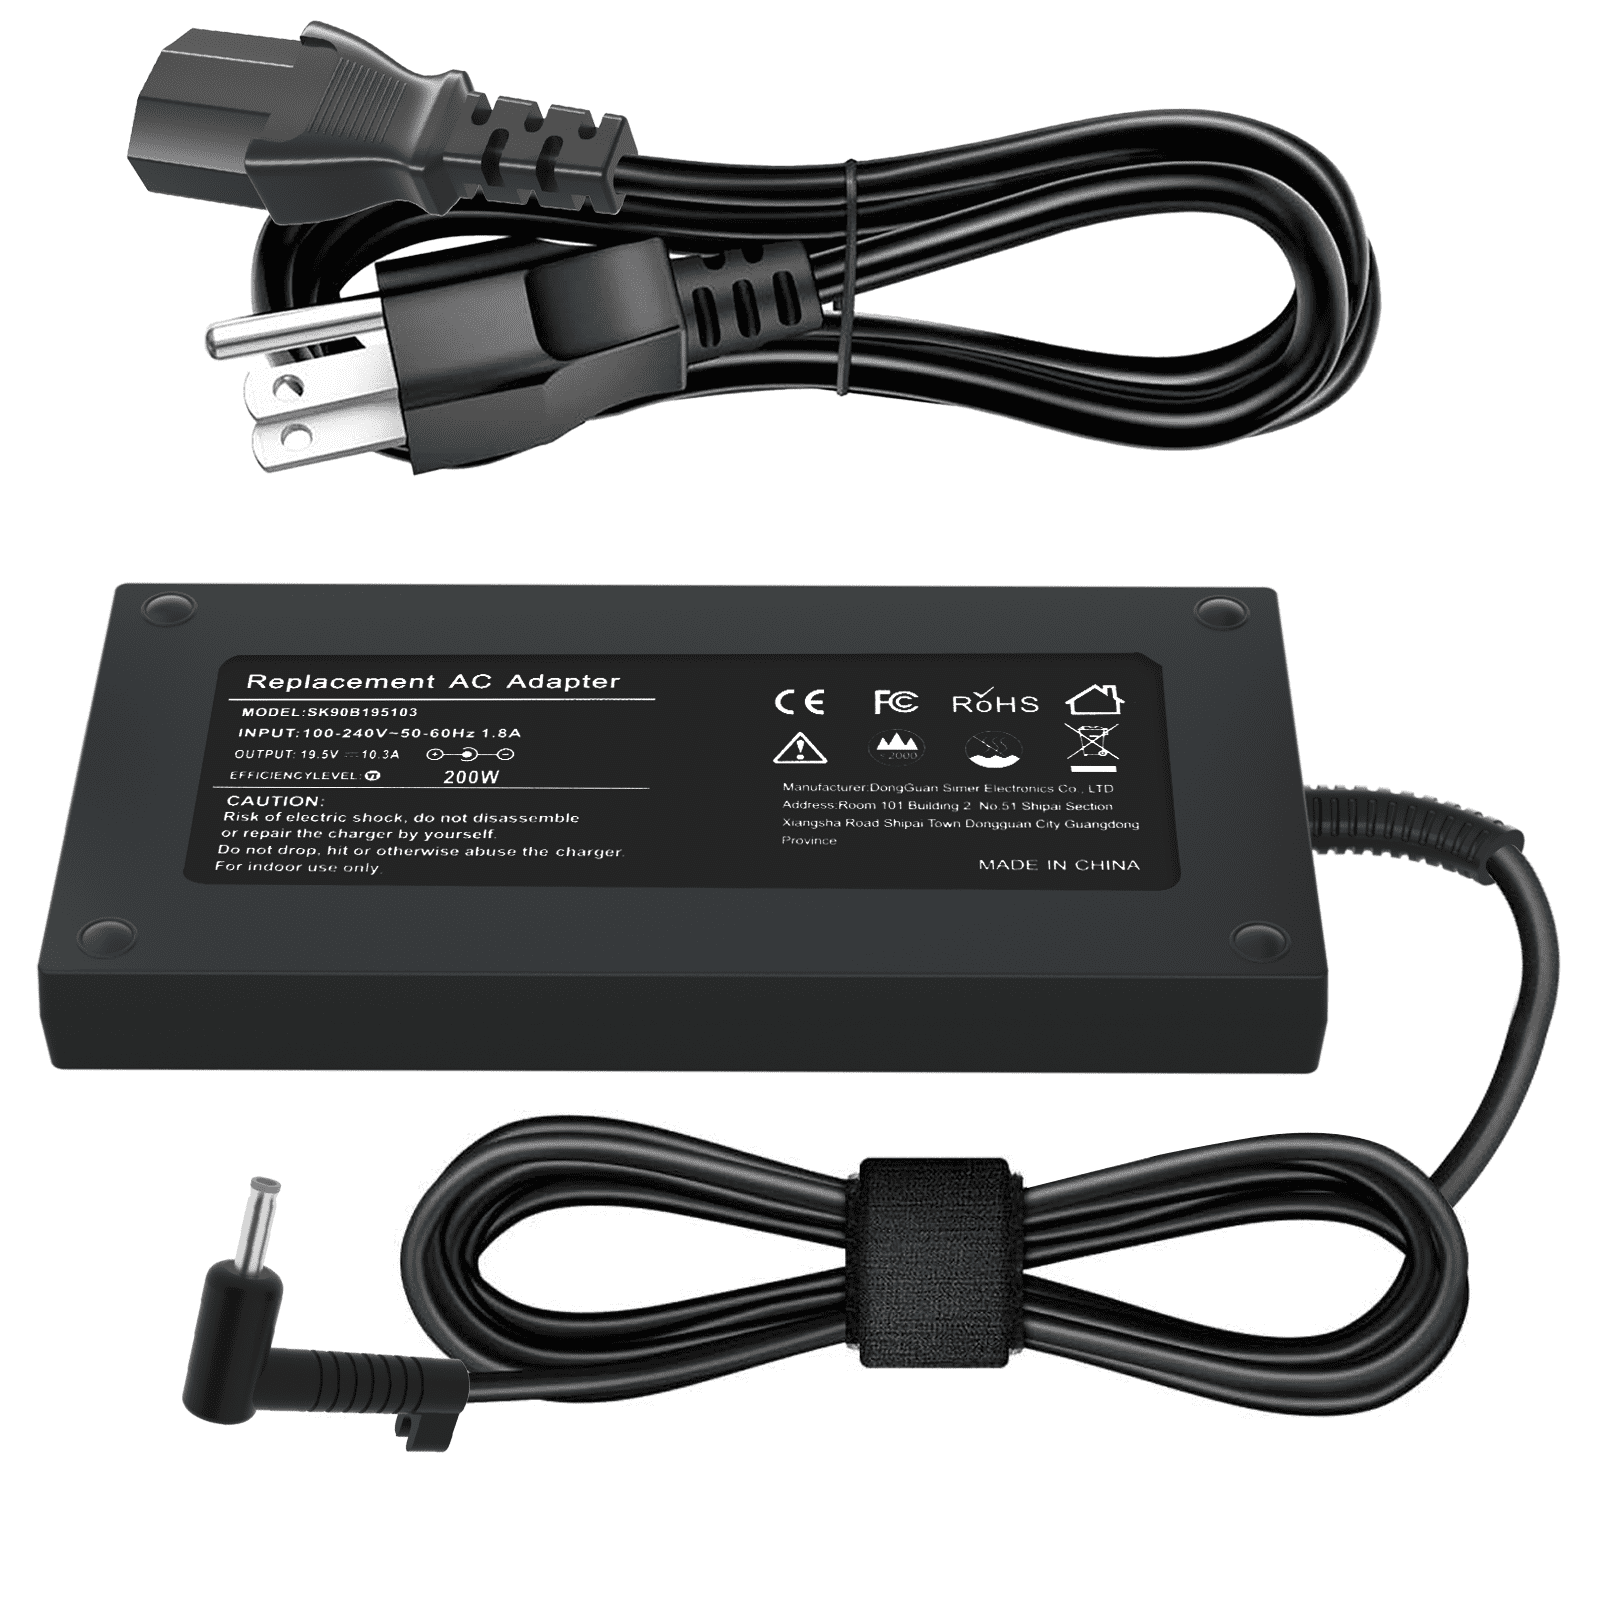 200W Charger L00818-850 Fit for hp OMEN Pavilion 15 16 17 G5 G6 G7 G8  Victus 15 16 HP ZBook 17 G3 G4 G5 Laptop Series, OMEN 15 16 15t 17 17t Envy  15